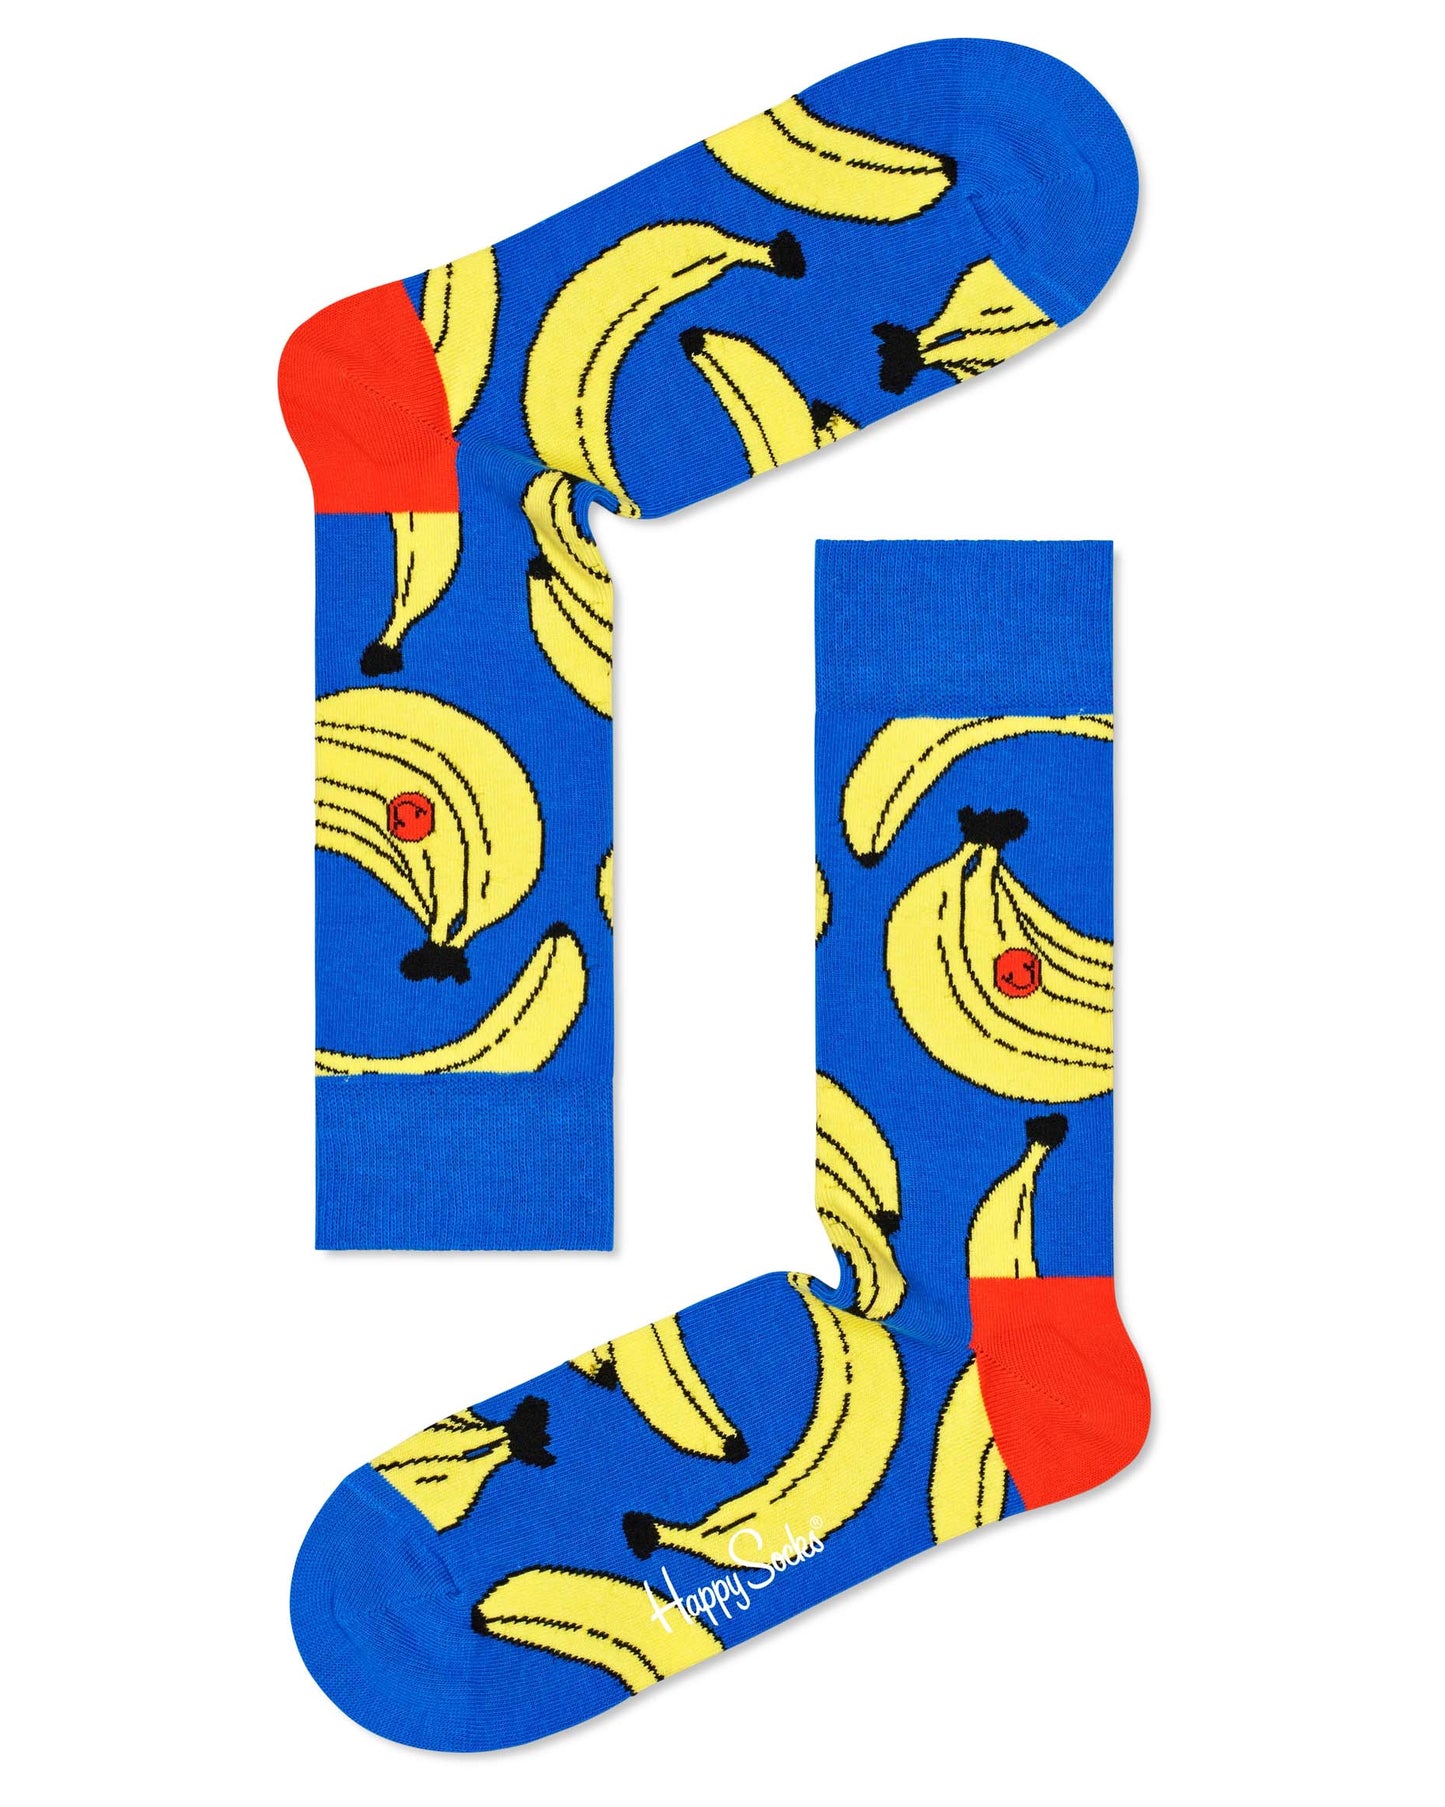 Happy Socks BAN01-6300 Bananas Sock - Bright blue cotton mix crew length ankle socks with a large banana pattern in pale yellow and black with orange smiley face and orange heel.